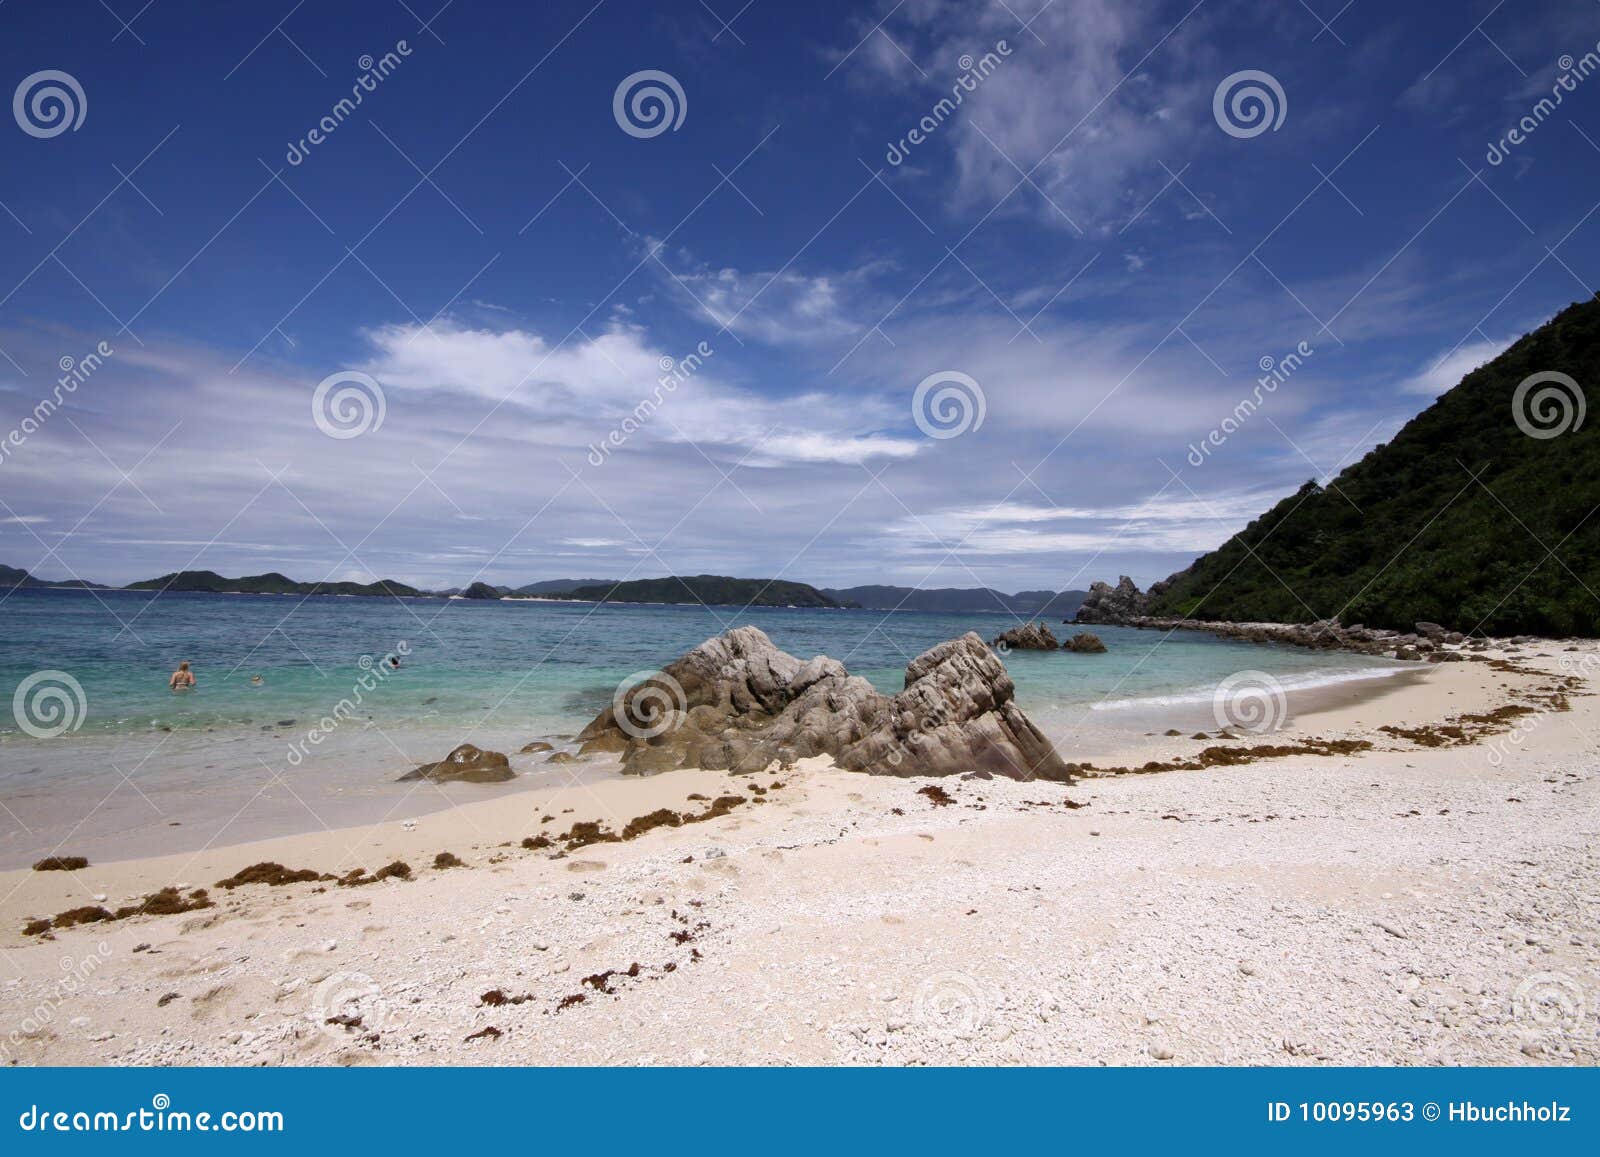 Sunny Sky Over Tropical Beach In Okinawa Japan Stock Image Image Of